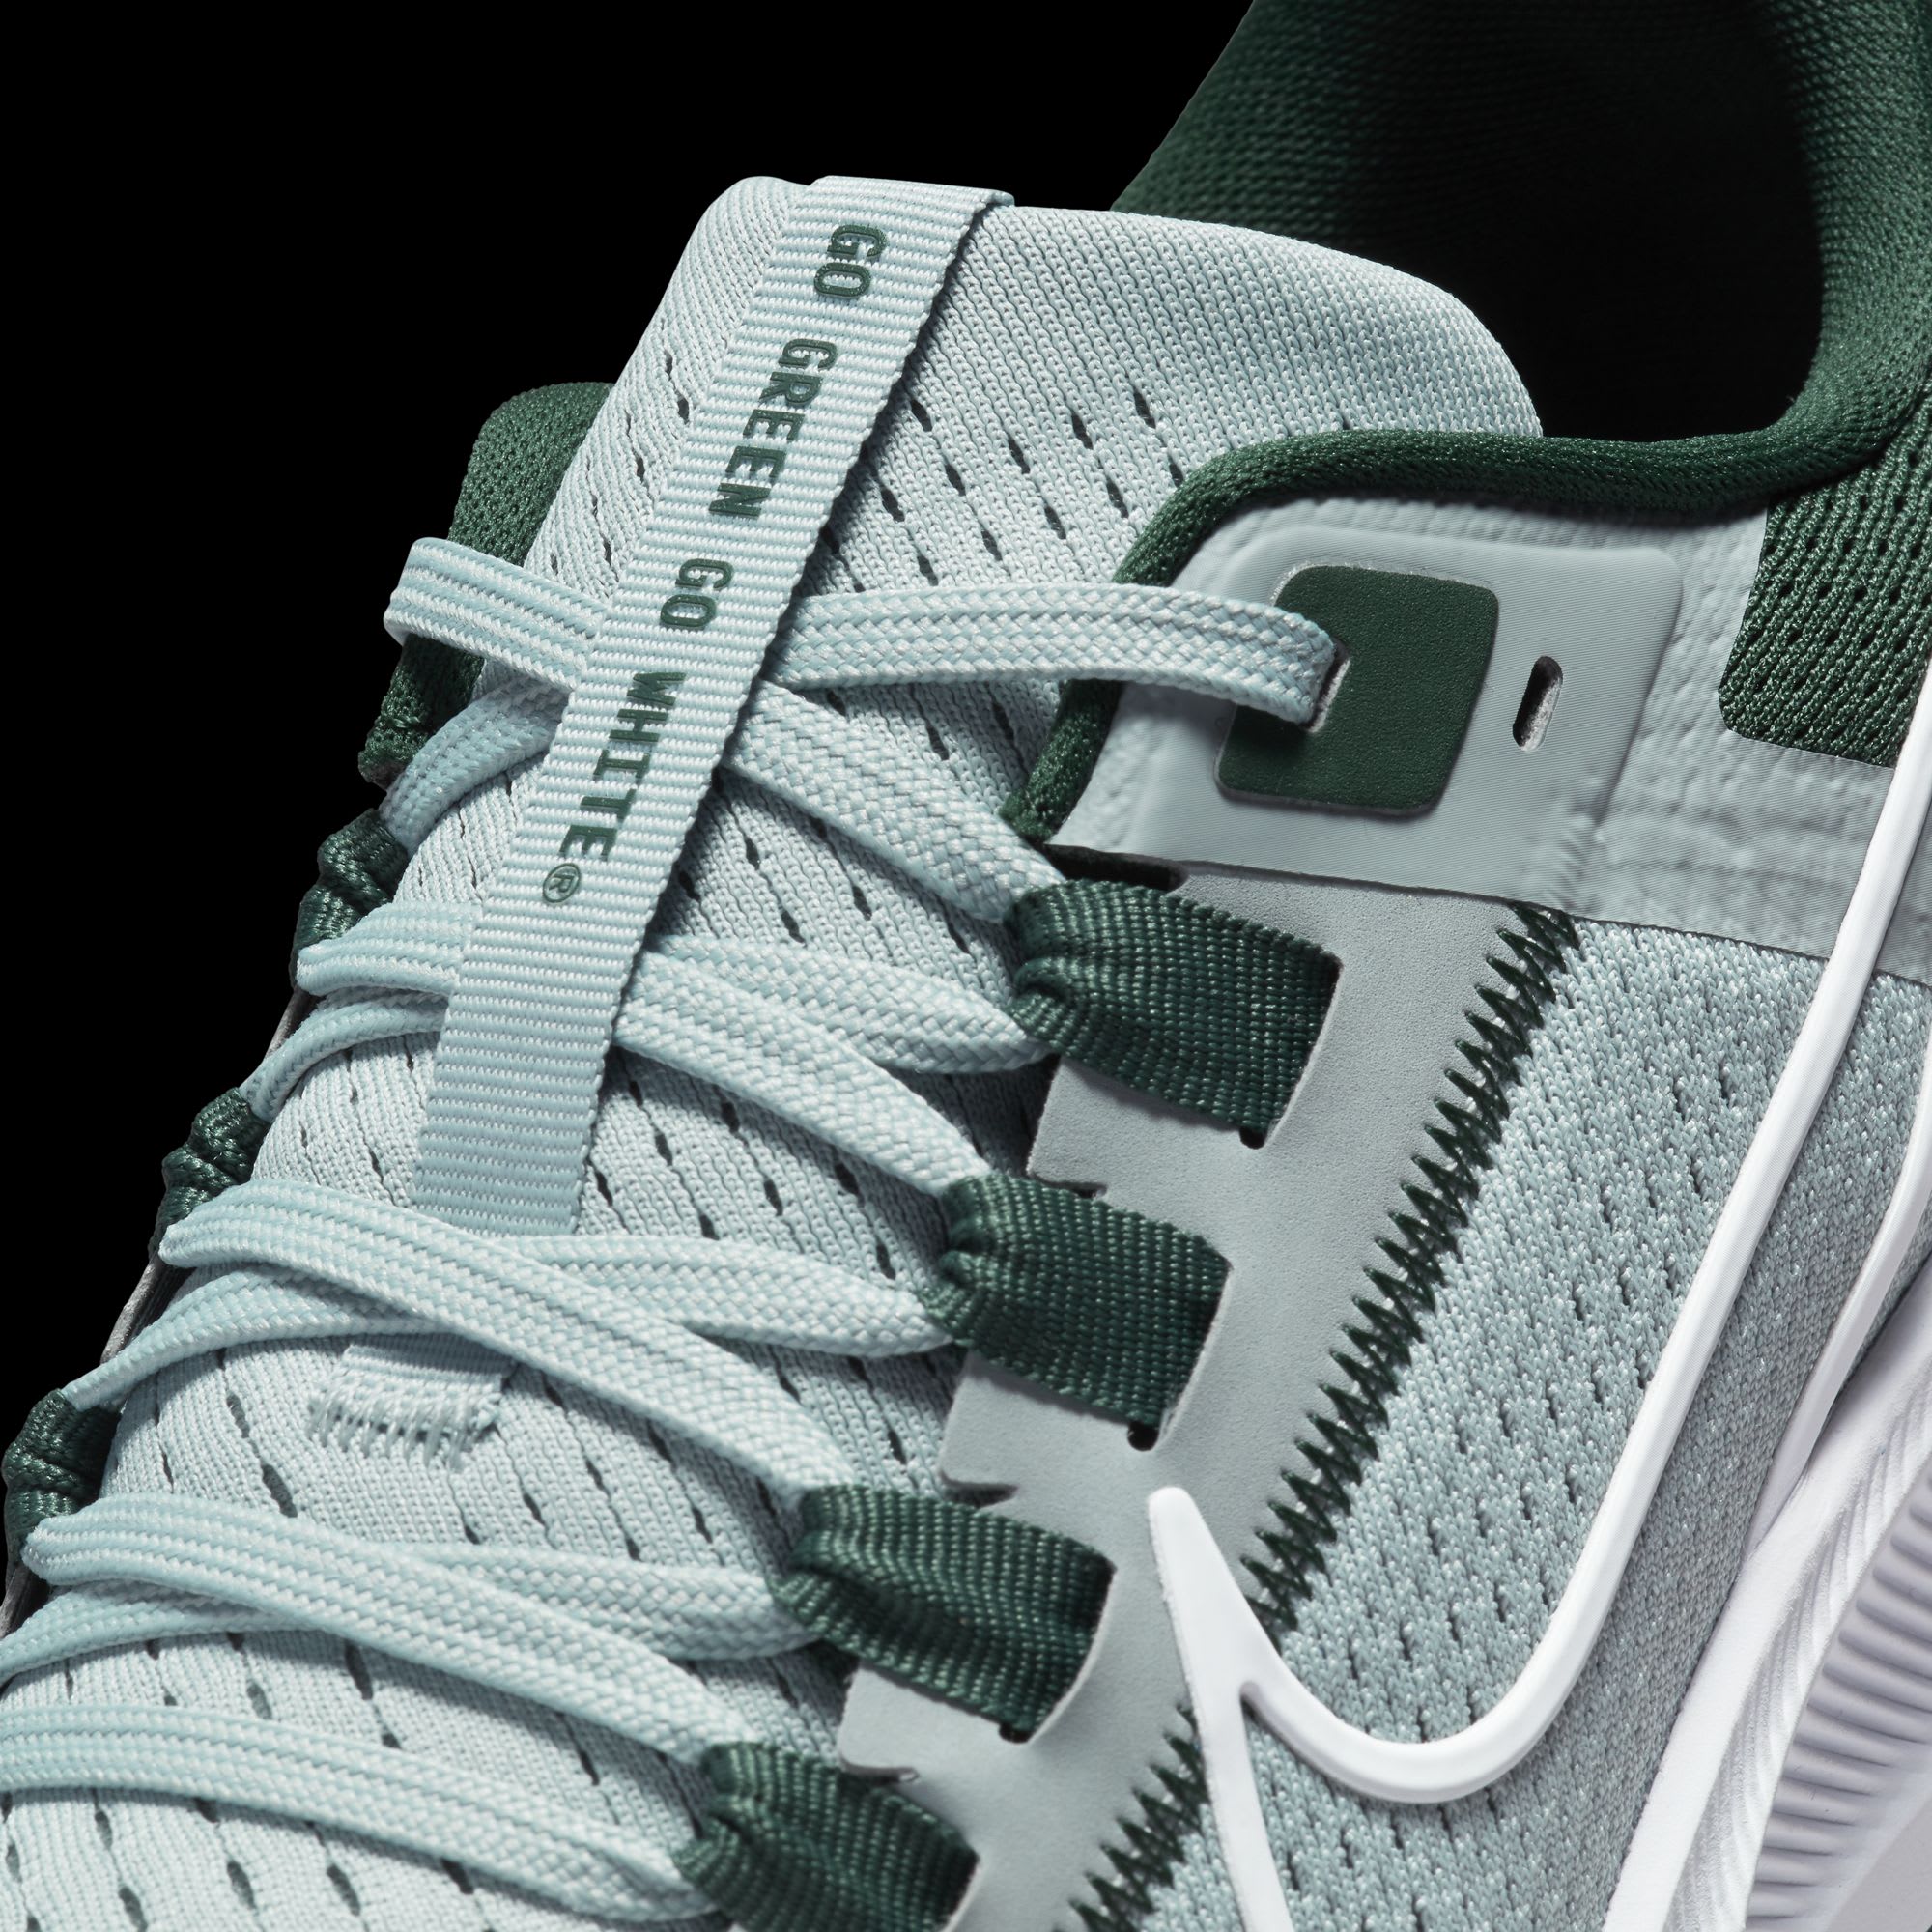 You need the Michigan State Spartans Nike Air Zoom Pegasus 38's